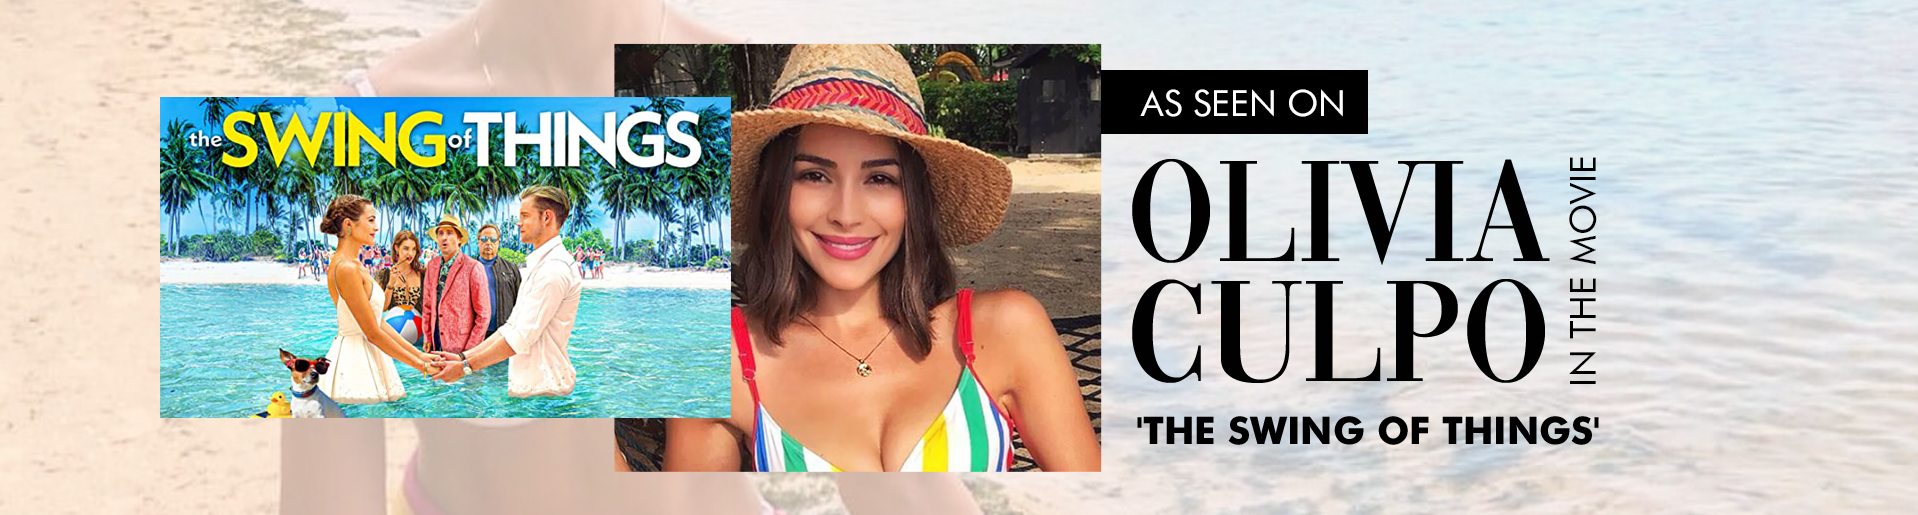 As seen on Olivia Culpo in the movie The Swing of Things